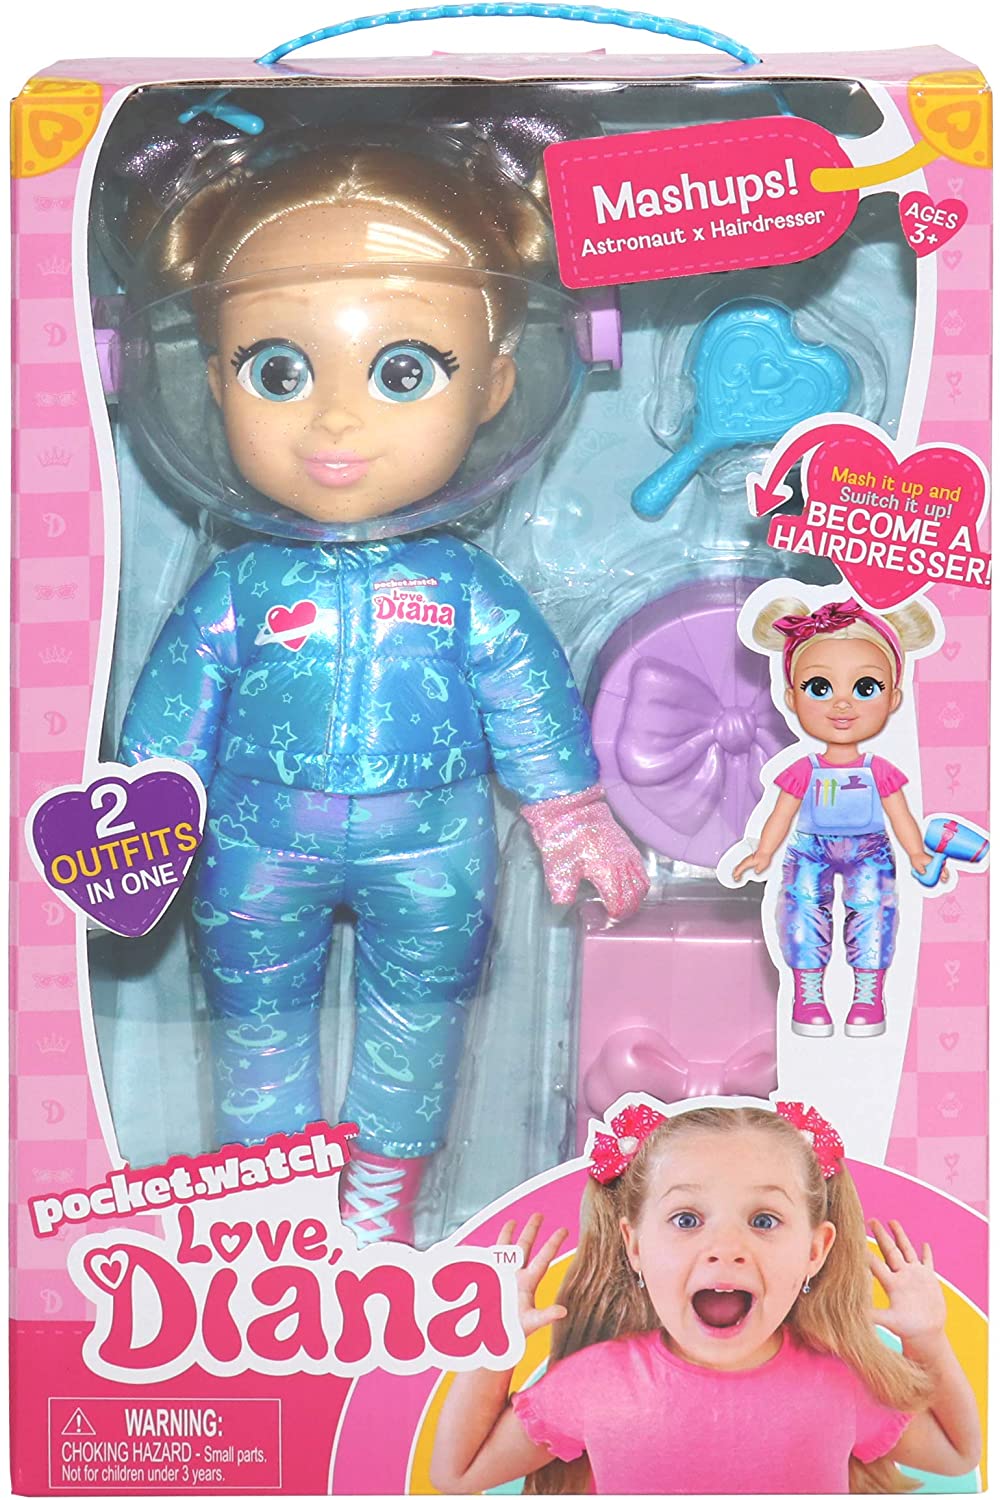 Love Diana Doll Mashup Astronaut 13 Inch 79846 Atl Toys 4 You